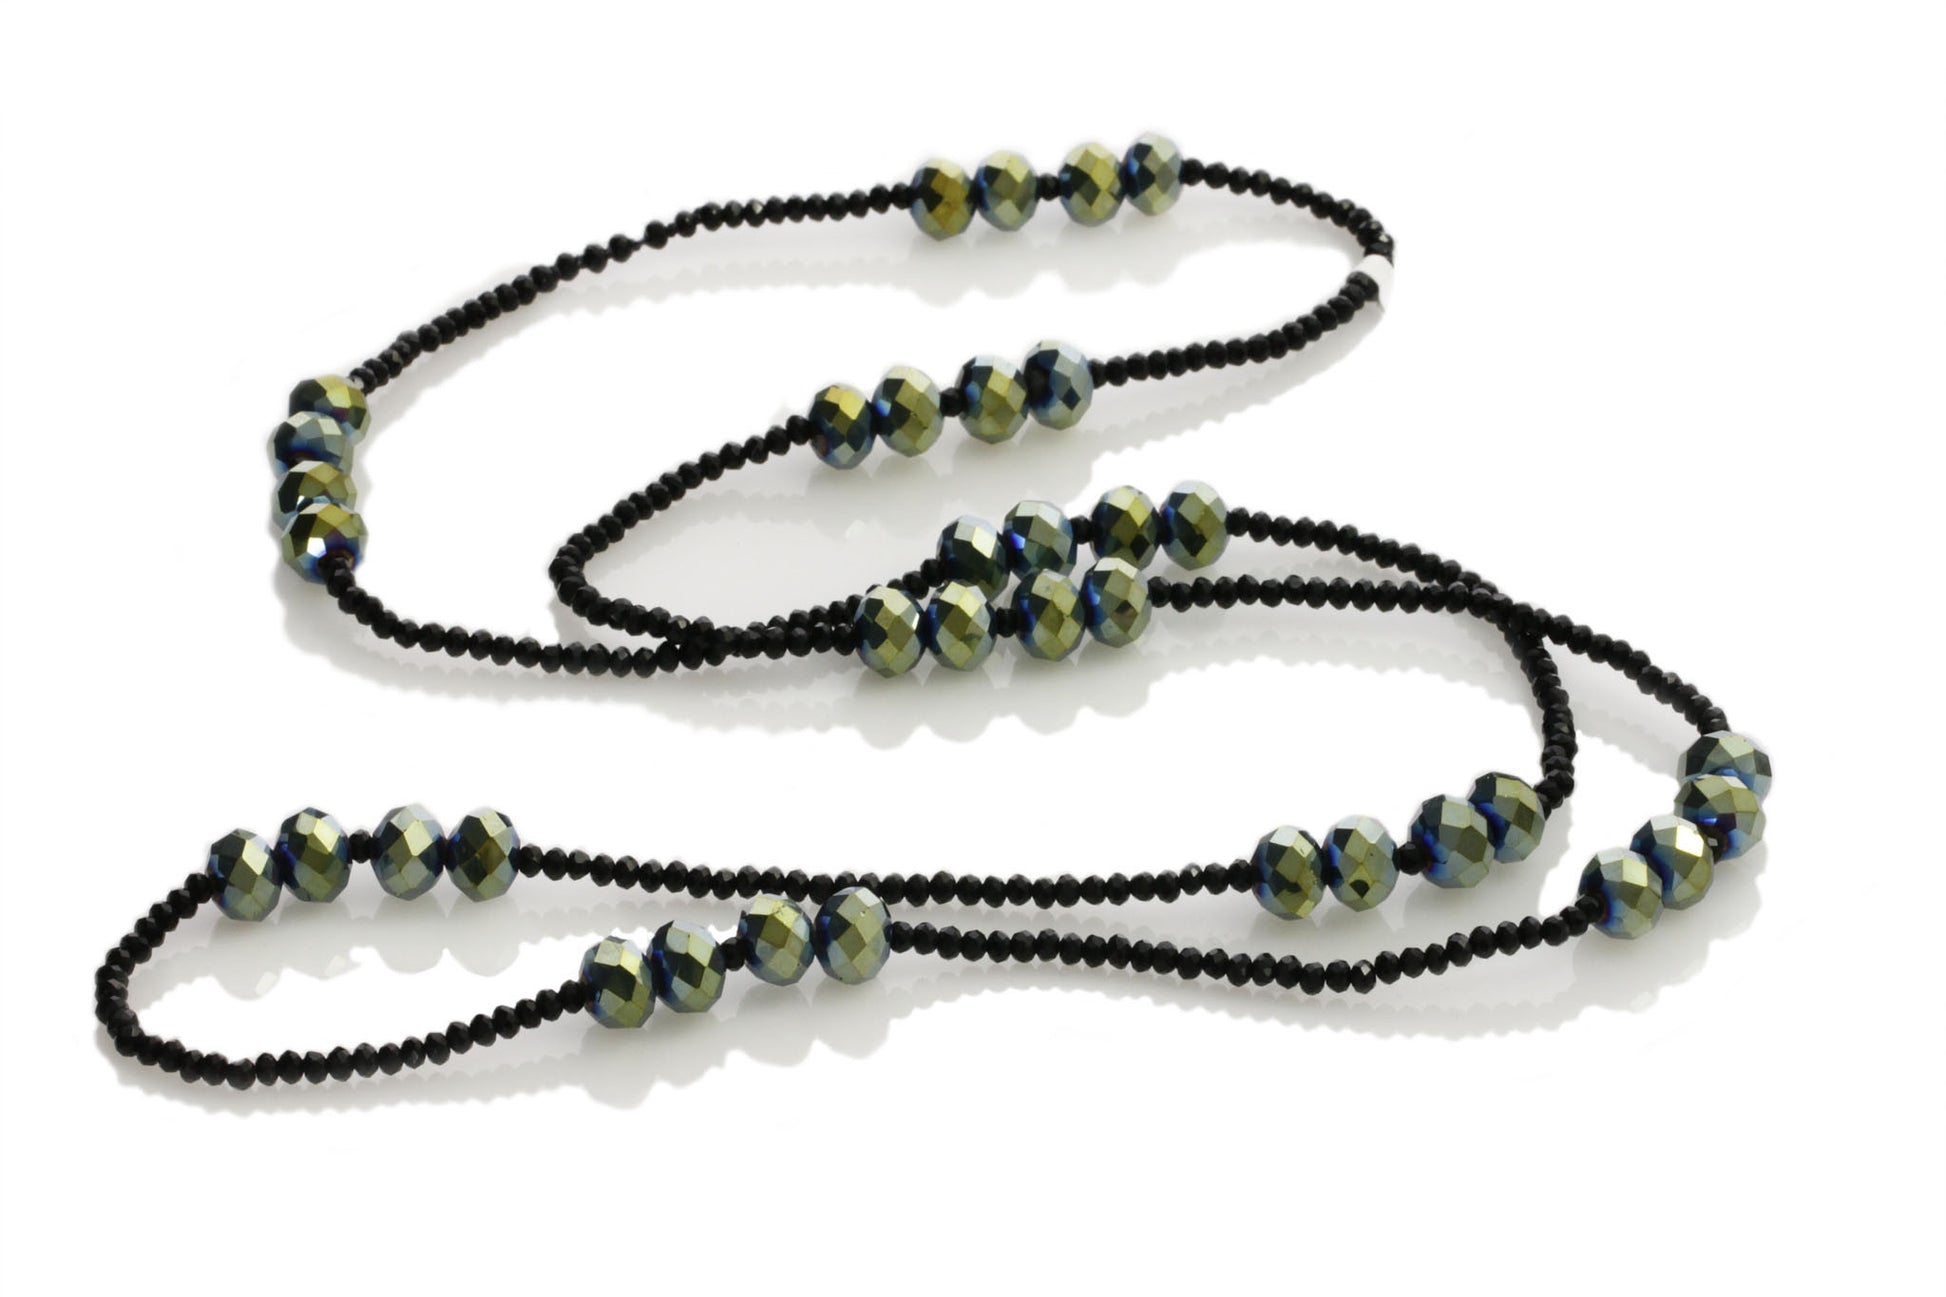 KTC- 325 Green Iridescent Large Crystals Long Necklace - Kalitheo Jewellery